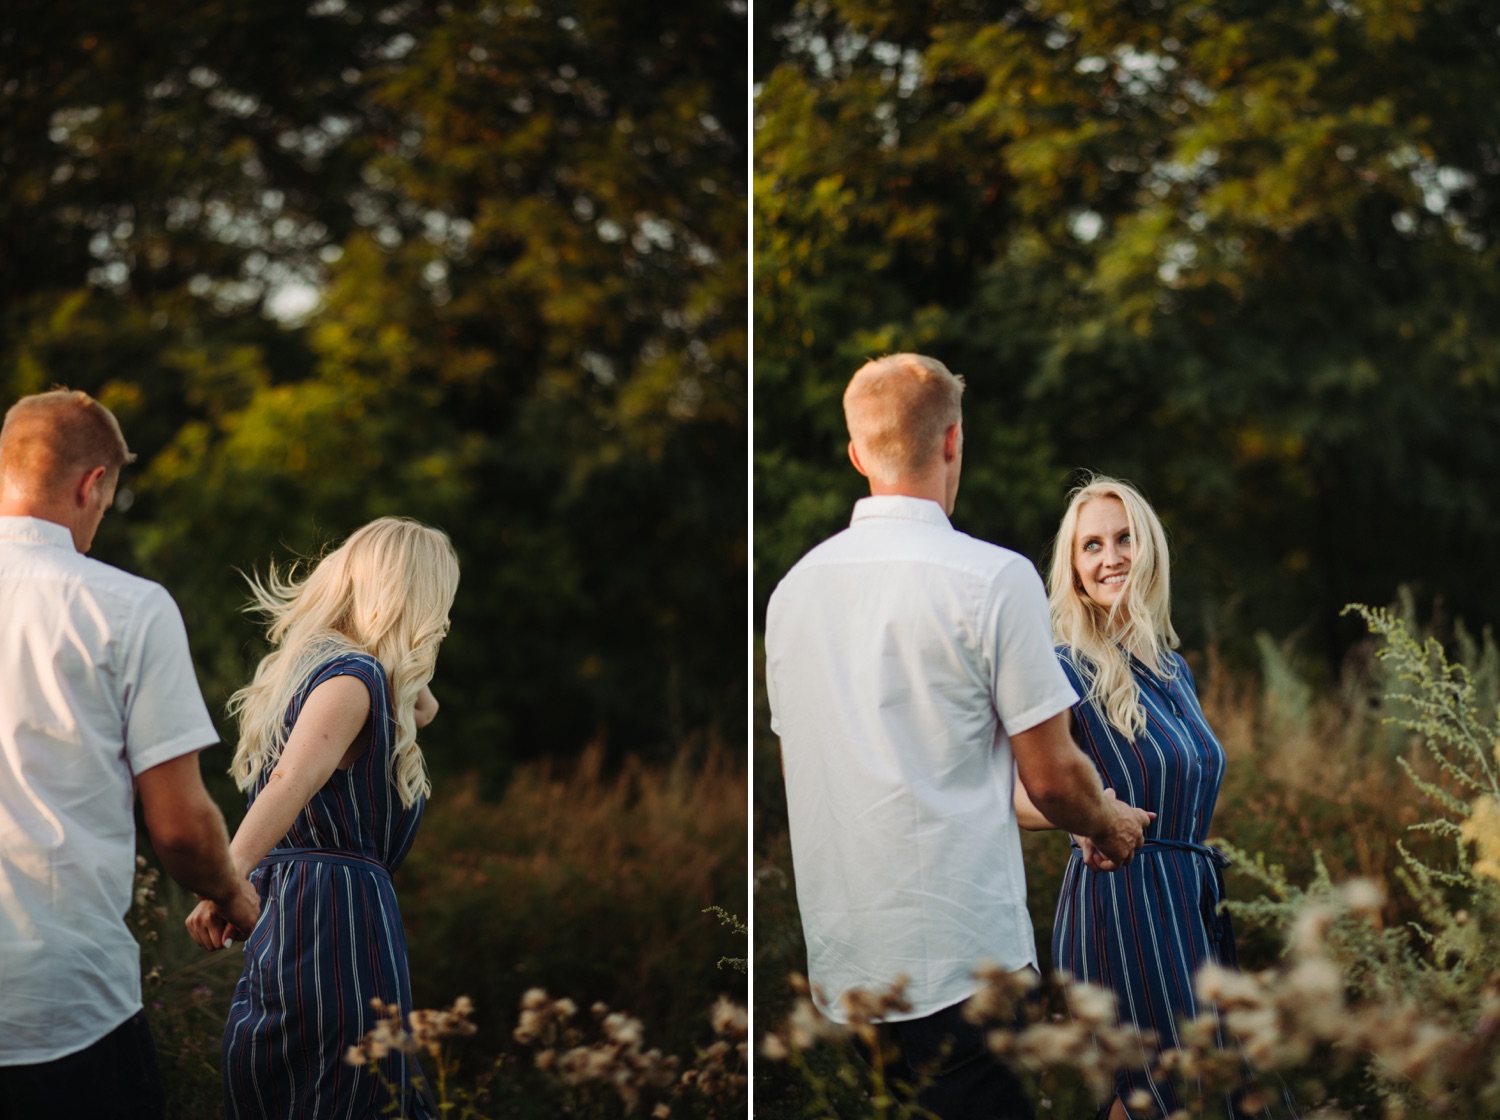 Engaged couple in summer field minneapolis photo session